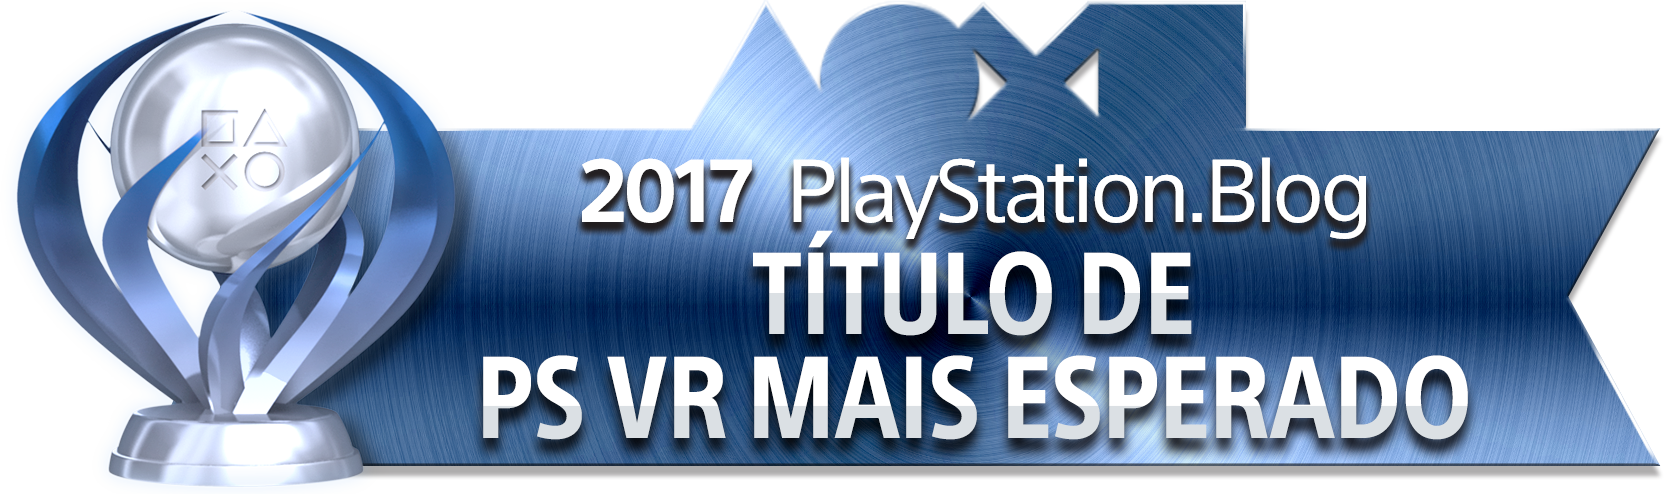 PlayStation Blog Game of the Year 2017 - Most Anticipated PS VR Title (Platinum)